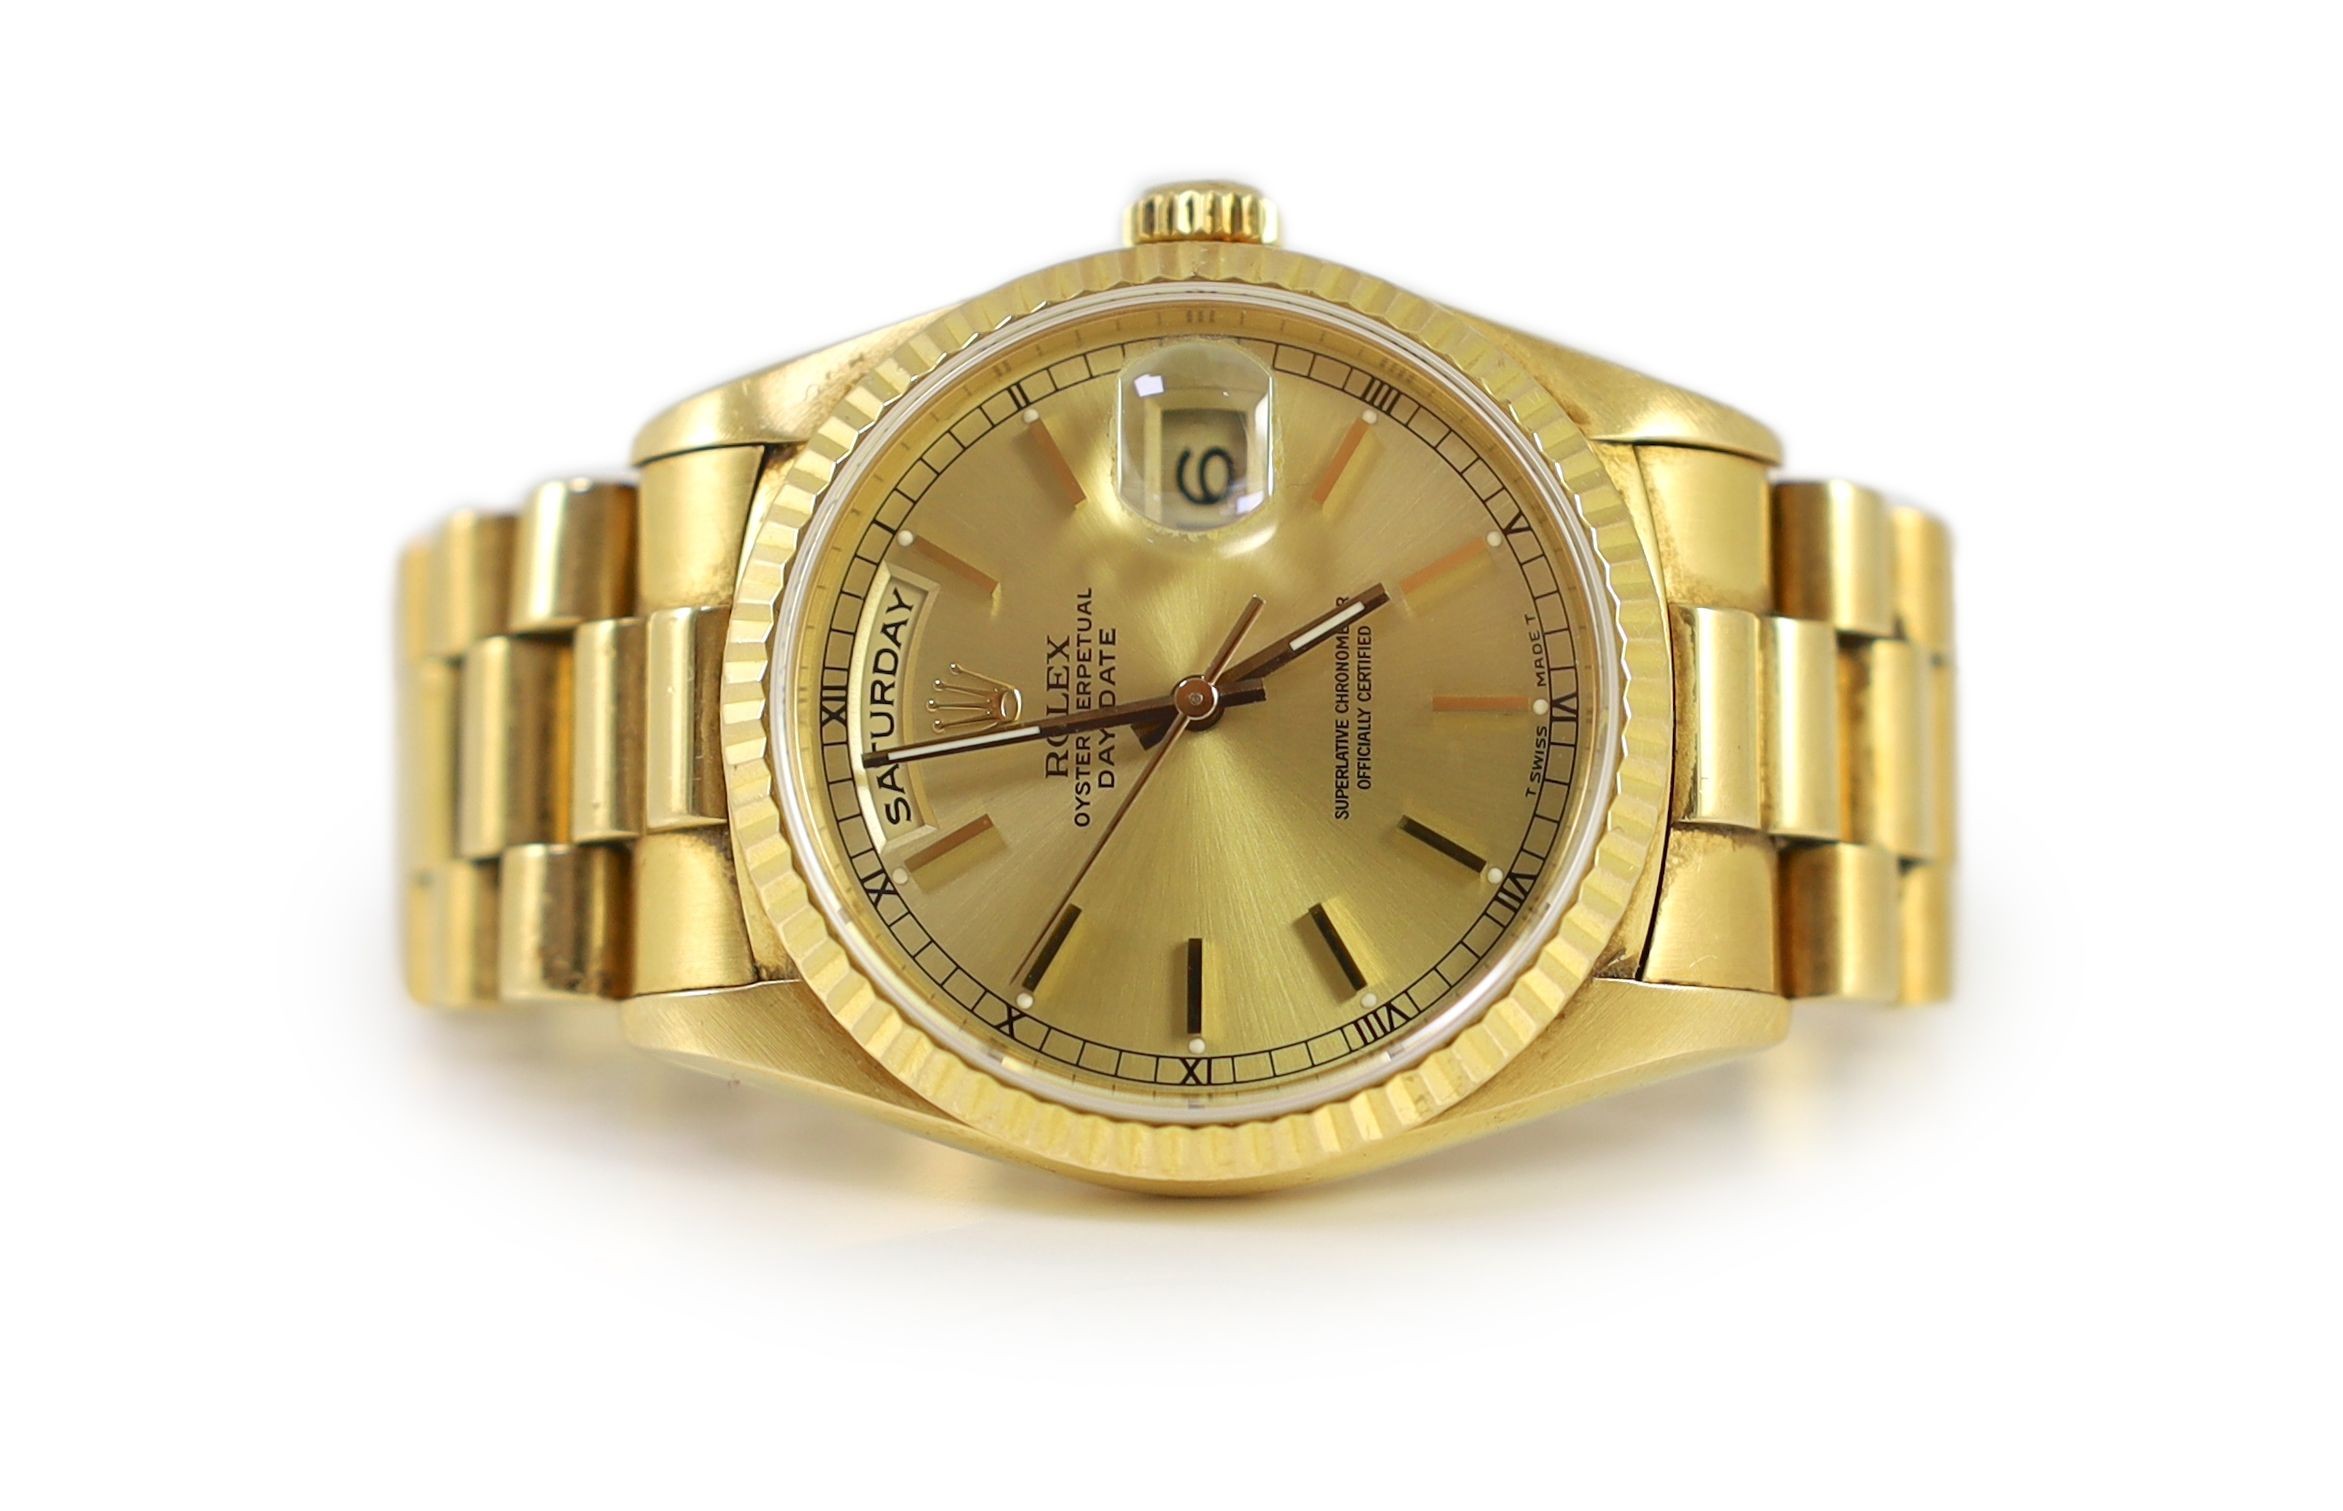 A gentleman's late 20th century 18ct gold Rolex Oyster Perpetual Day Date wrist watch, on an 18ct gold Rolex bracelet with deployment clasp